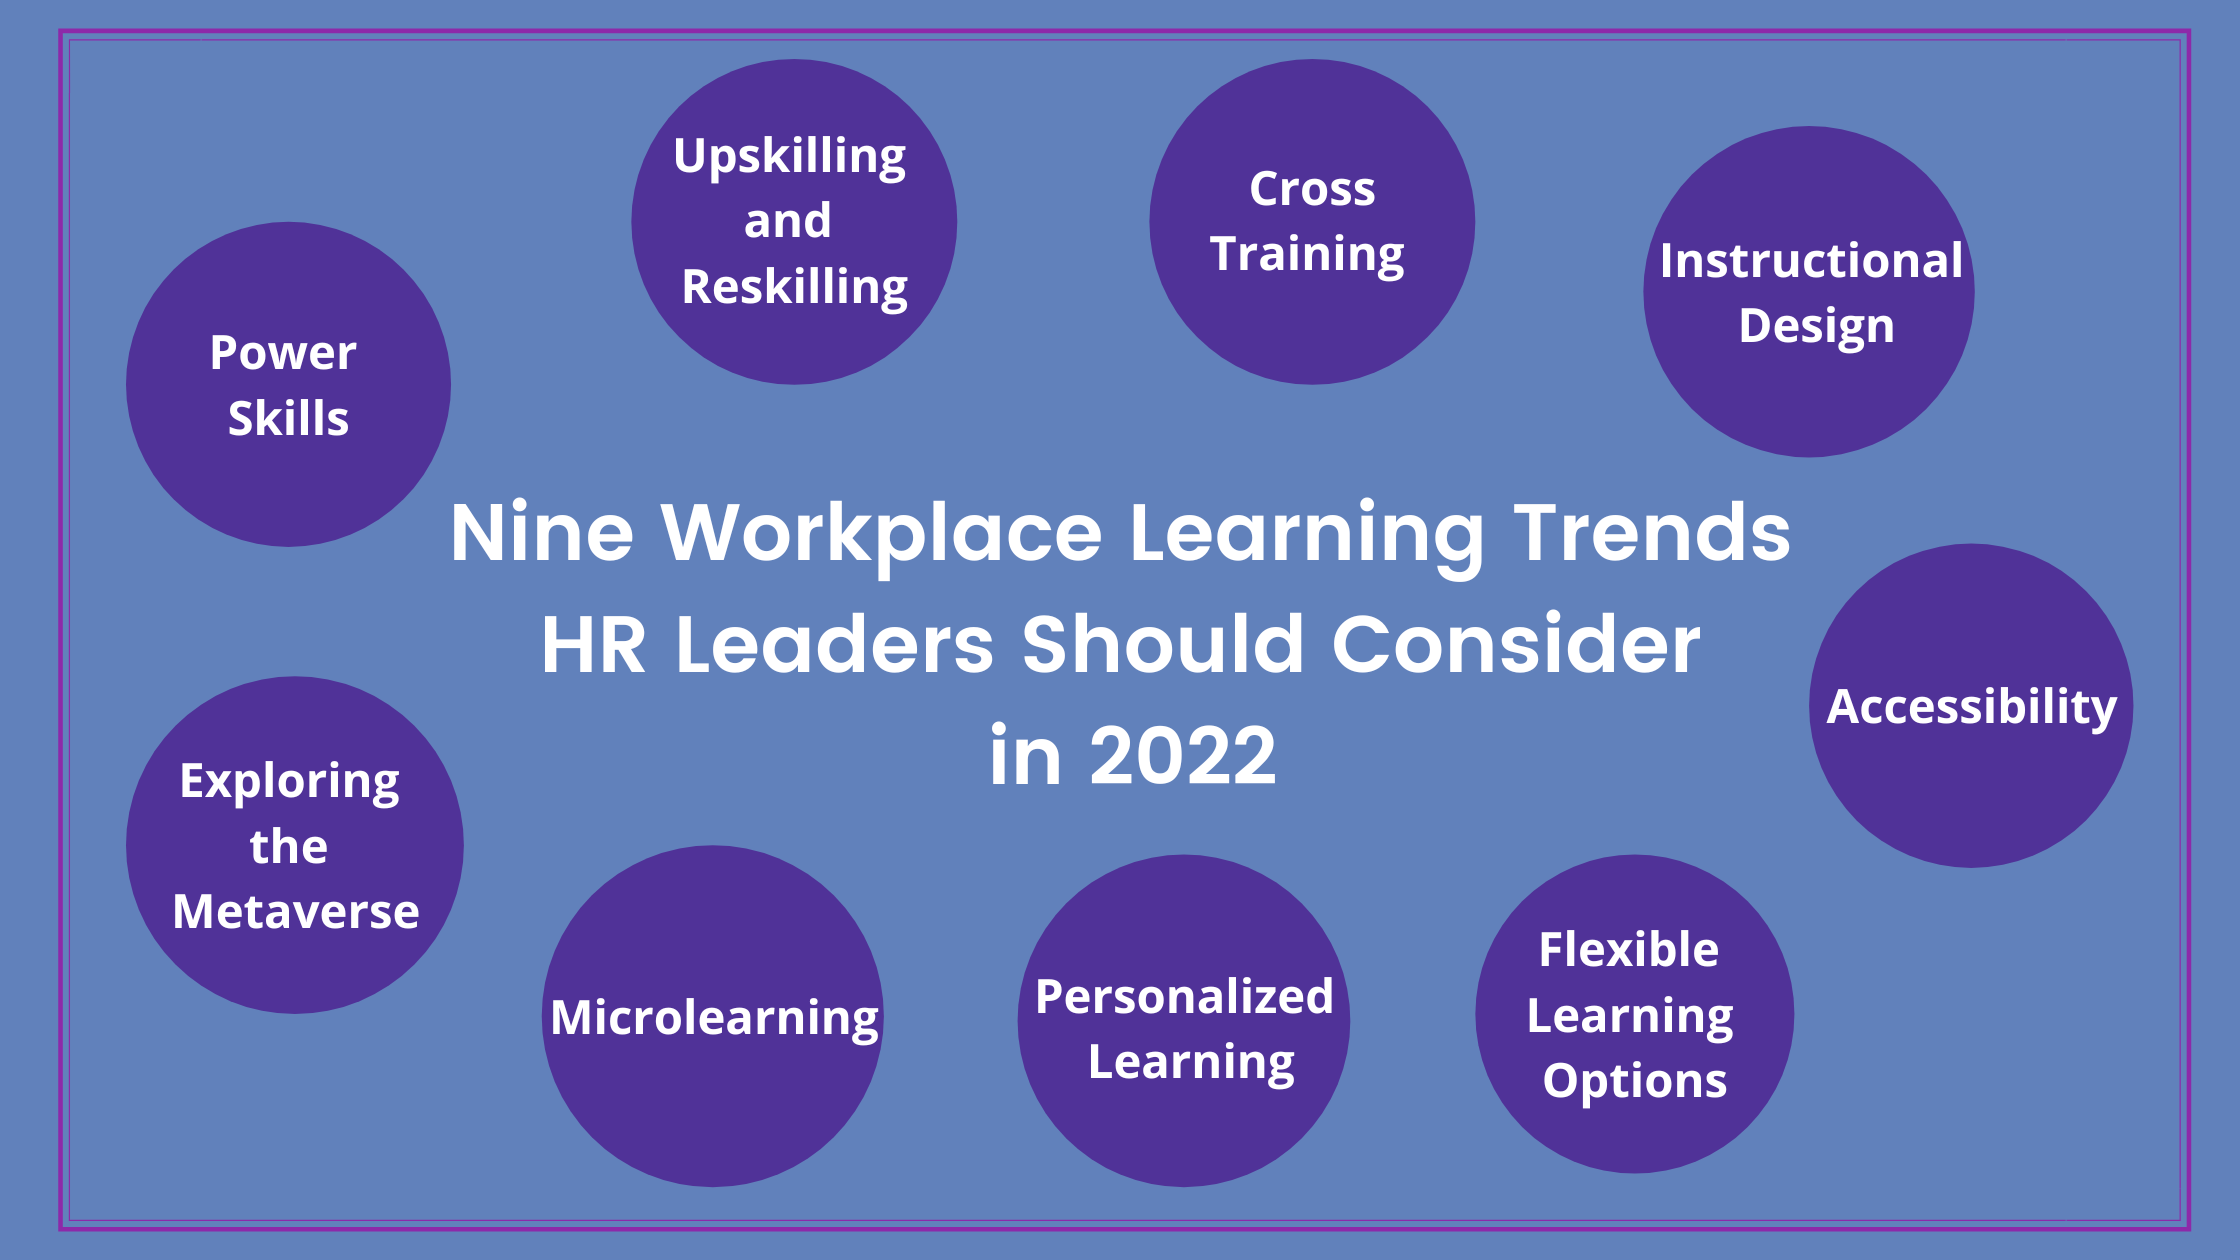 Nine Workplace Learning Trends HR Leaders Should Consider in 2022